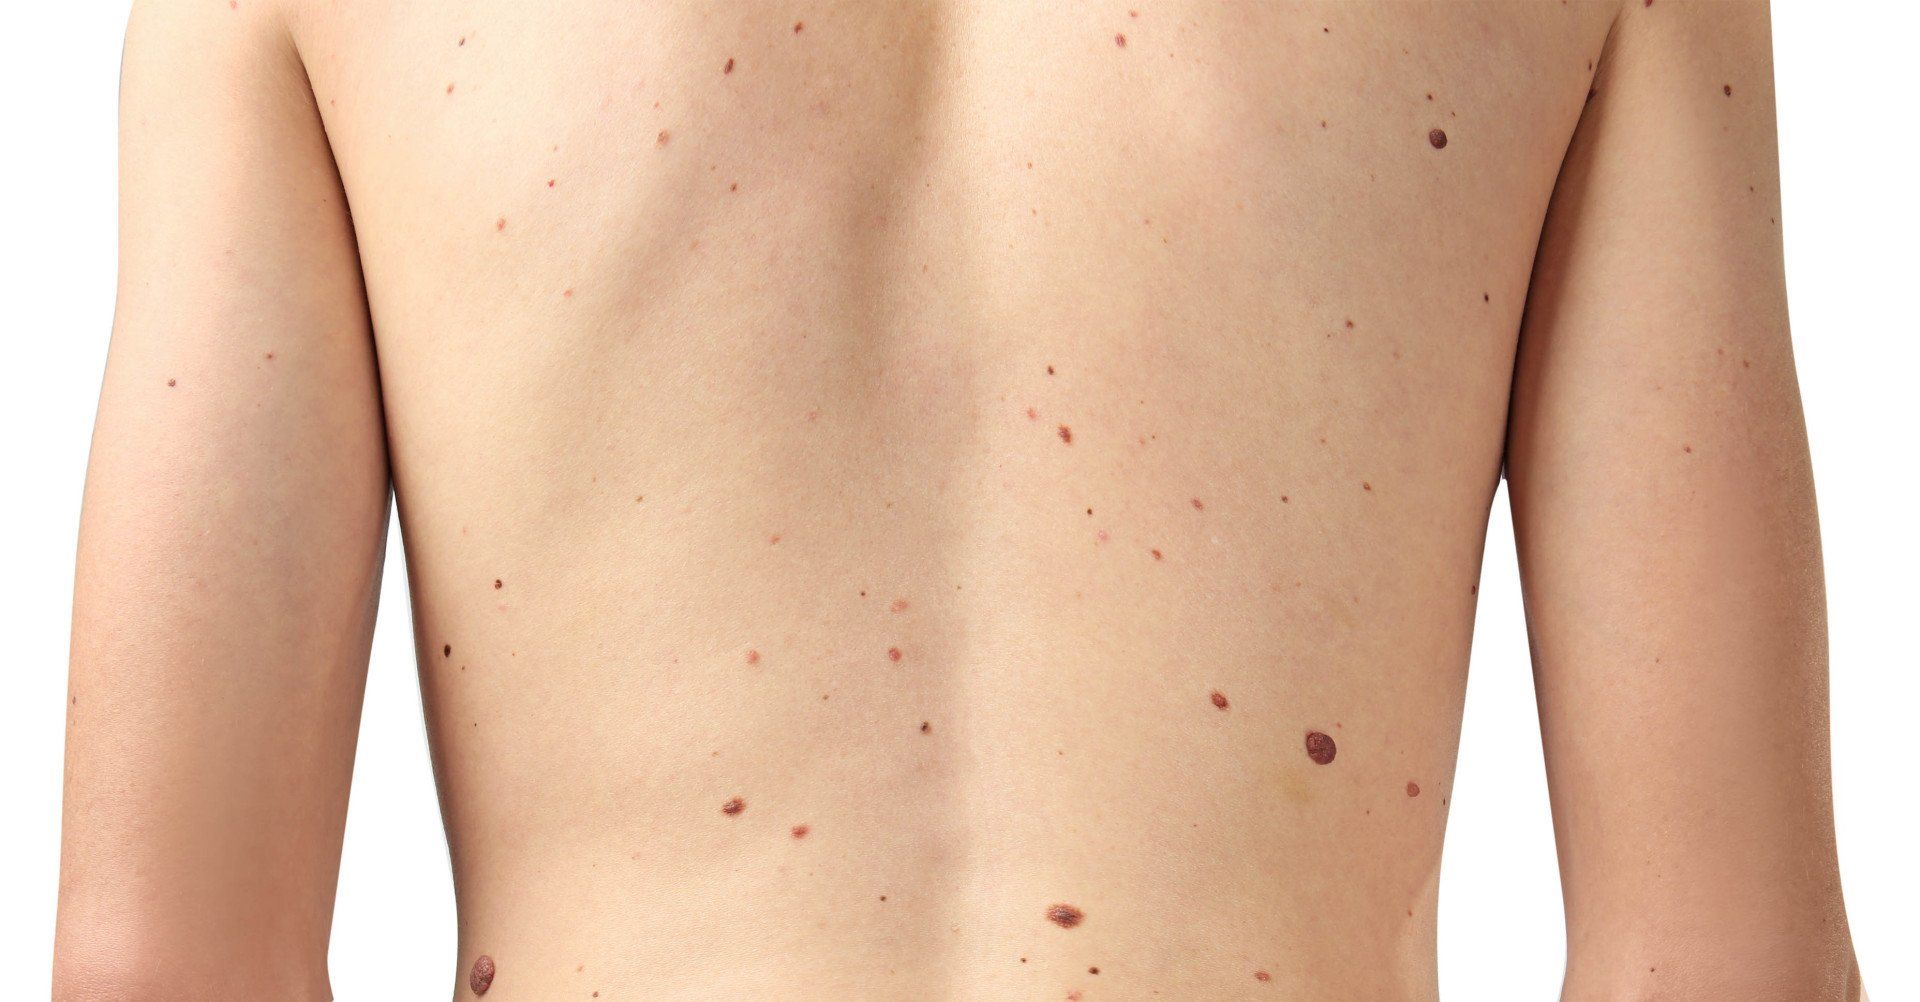 moles on the back of a young man